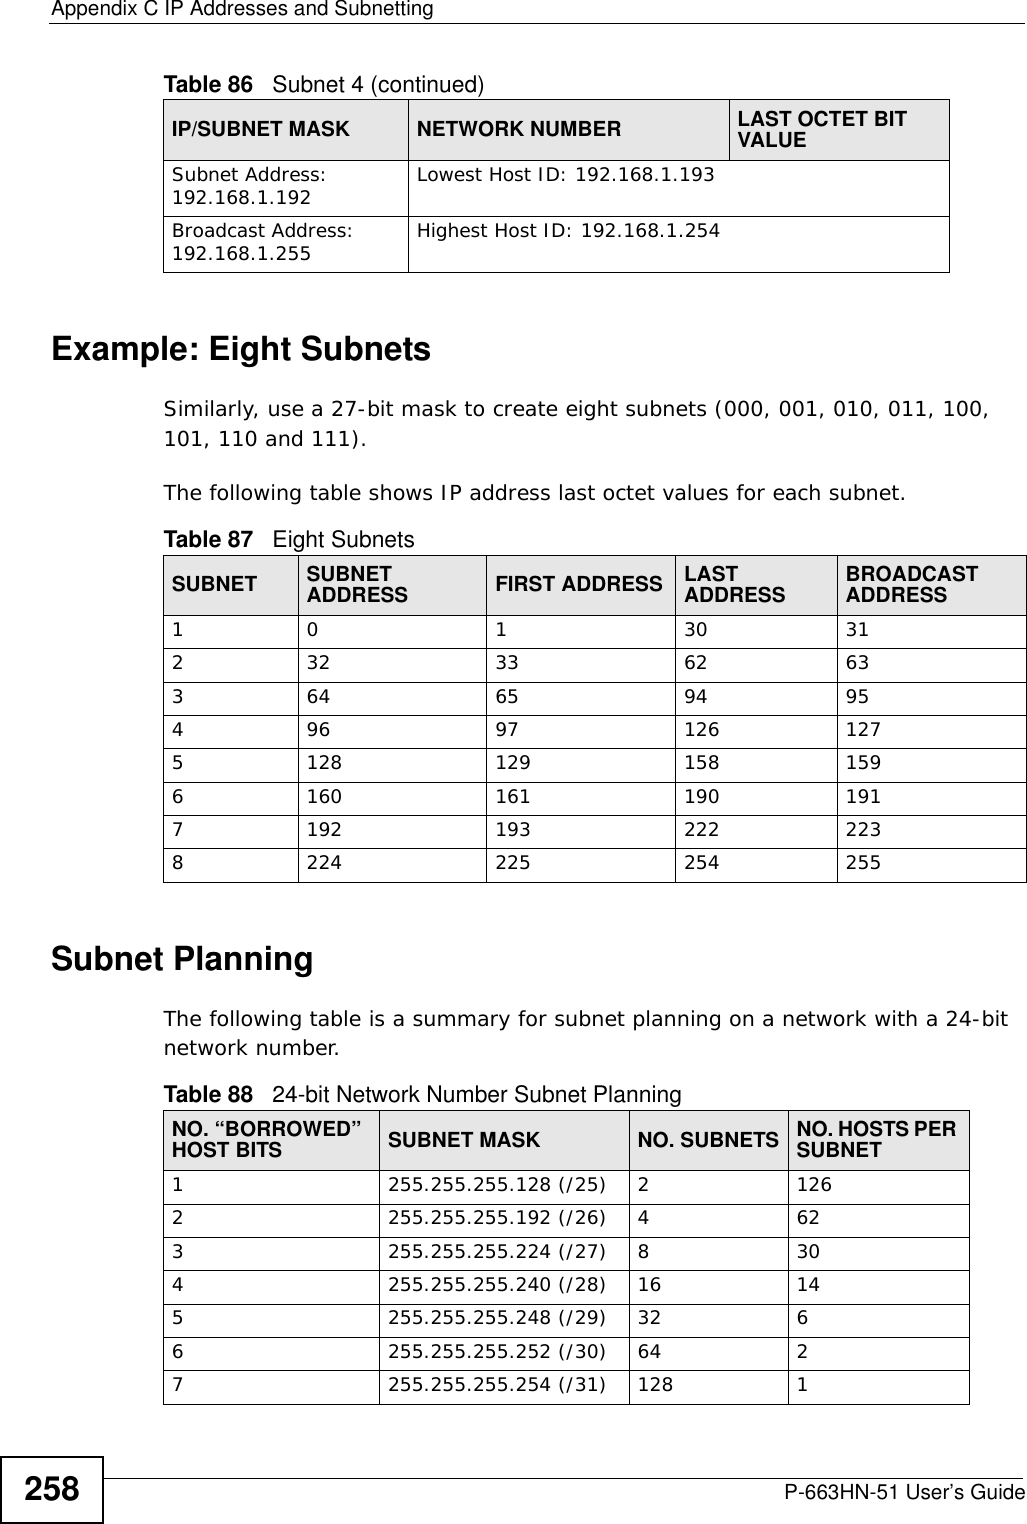 Appendix C IP Addresses and SubnettingP-663HN-51 User’s Guide258Example: Eight SubnetsSimilarly, use a 27-bit mask to create eight subnets (000, 001, 010, 011, 100, 101, 110 and 111). The following table shows IP address last octet values for each subnet.Subnet PlanningThe following table is a summary for subnet planning on a network with a 24-bit network number.Subnet Address: 192.168.1.192 Lowest Host ID: 192.168.1.193Broadcast Address: 192.168.1.255 Highest Host ID: 192.168.1.254Table 86   Subnet 4 (continued)IP/SUBNET MASK NETWORK NUMBER LAST OCTET BIT VALUETable 87   Eight SubnetsSUBNET SUBNET ADDRESS FIRST ADDRESS LAST ADDRESS BROADCAST ADDRESS1 0 1 30 31232 33 62 63364 65 94 95496 97 126 1275128 129 158 1596160 161 190 1917192 193 222 2238224 225 254 255Table 88   24-bit Network Number Subnet PlanningNO. “BORROWED” HOST BITS SUBNET MASK NO. SUBNETS NO. HOSTS PER SUBNET1255.255.255.128 (/25) 21262255.255.255.192 (/26) 4623255.255.255.224 (/27) 8304255.255.255.240 (/28) 16 145255.255.255.248 (/29) 32 66255.255.255.252 (/30) 64 27255.255.255.254 (/31) 128 1